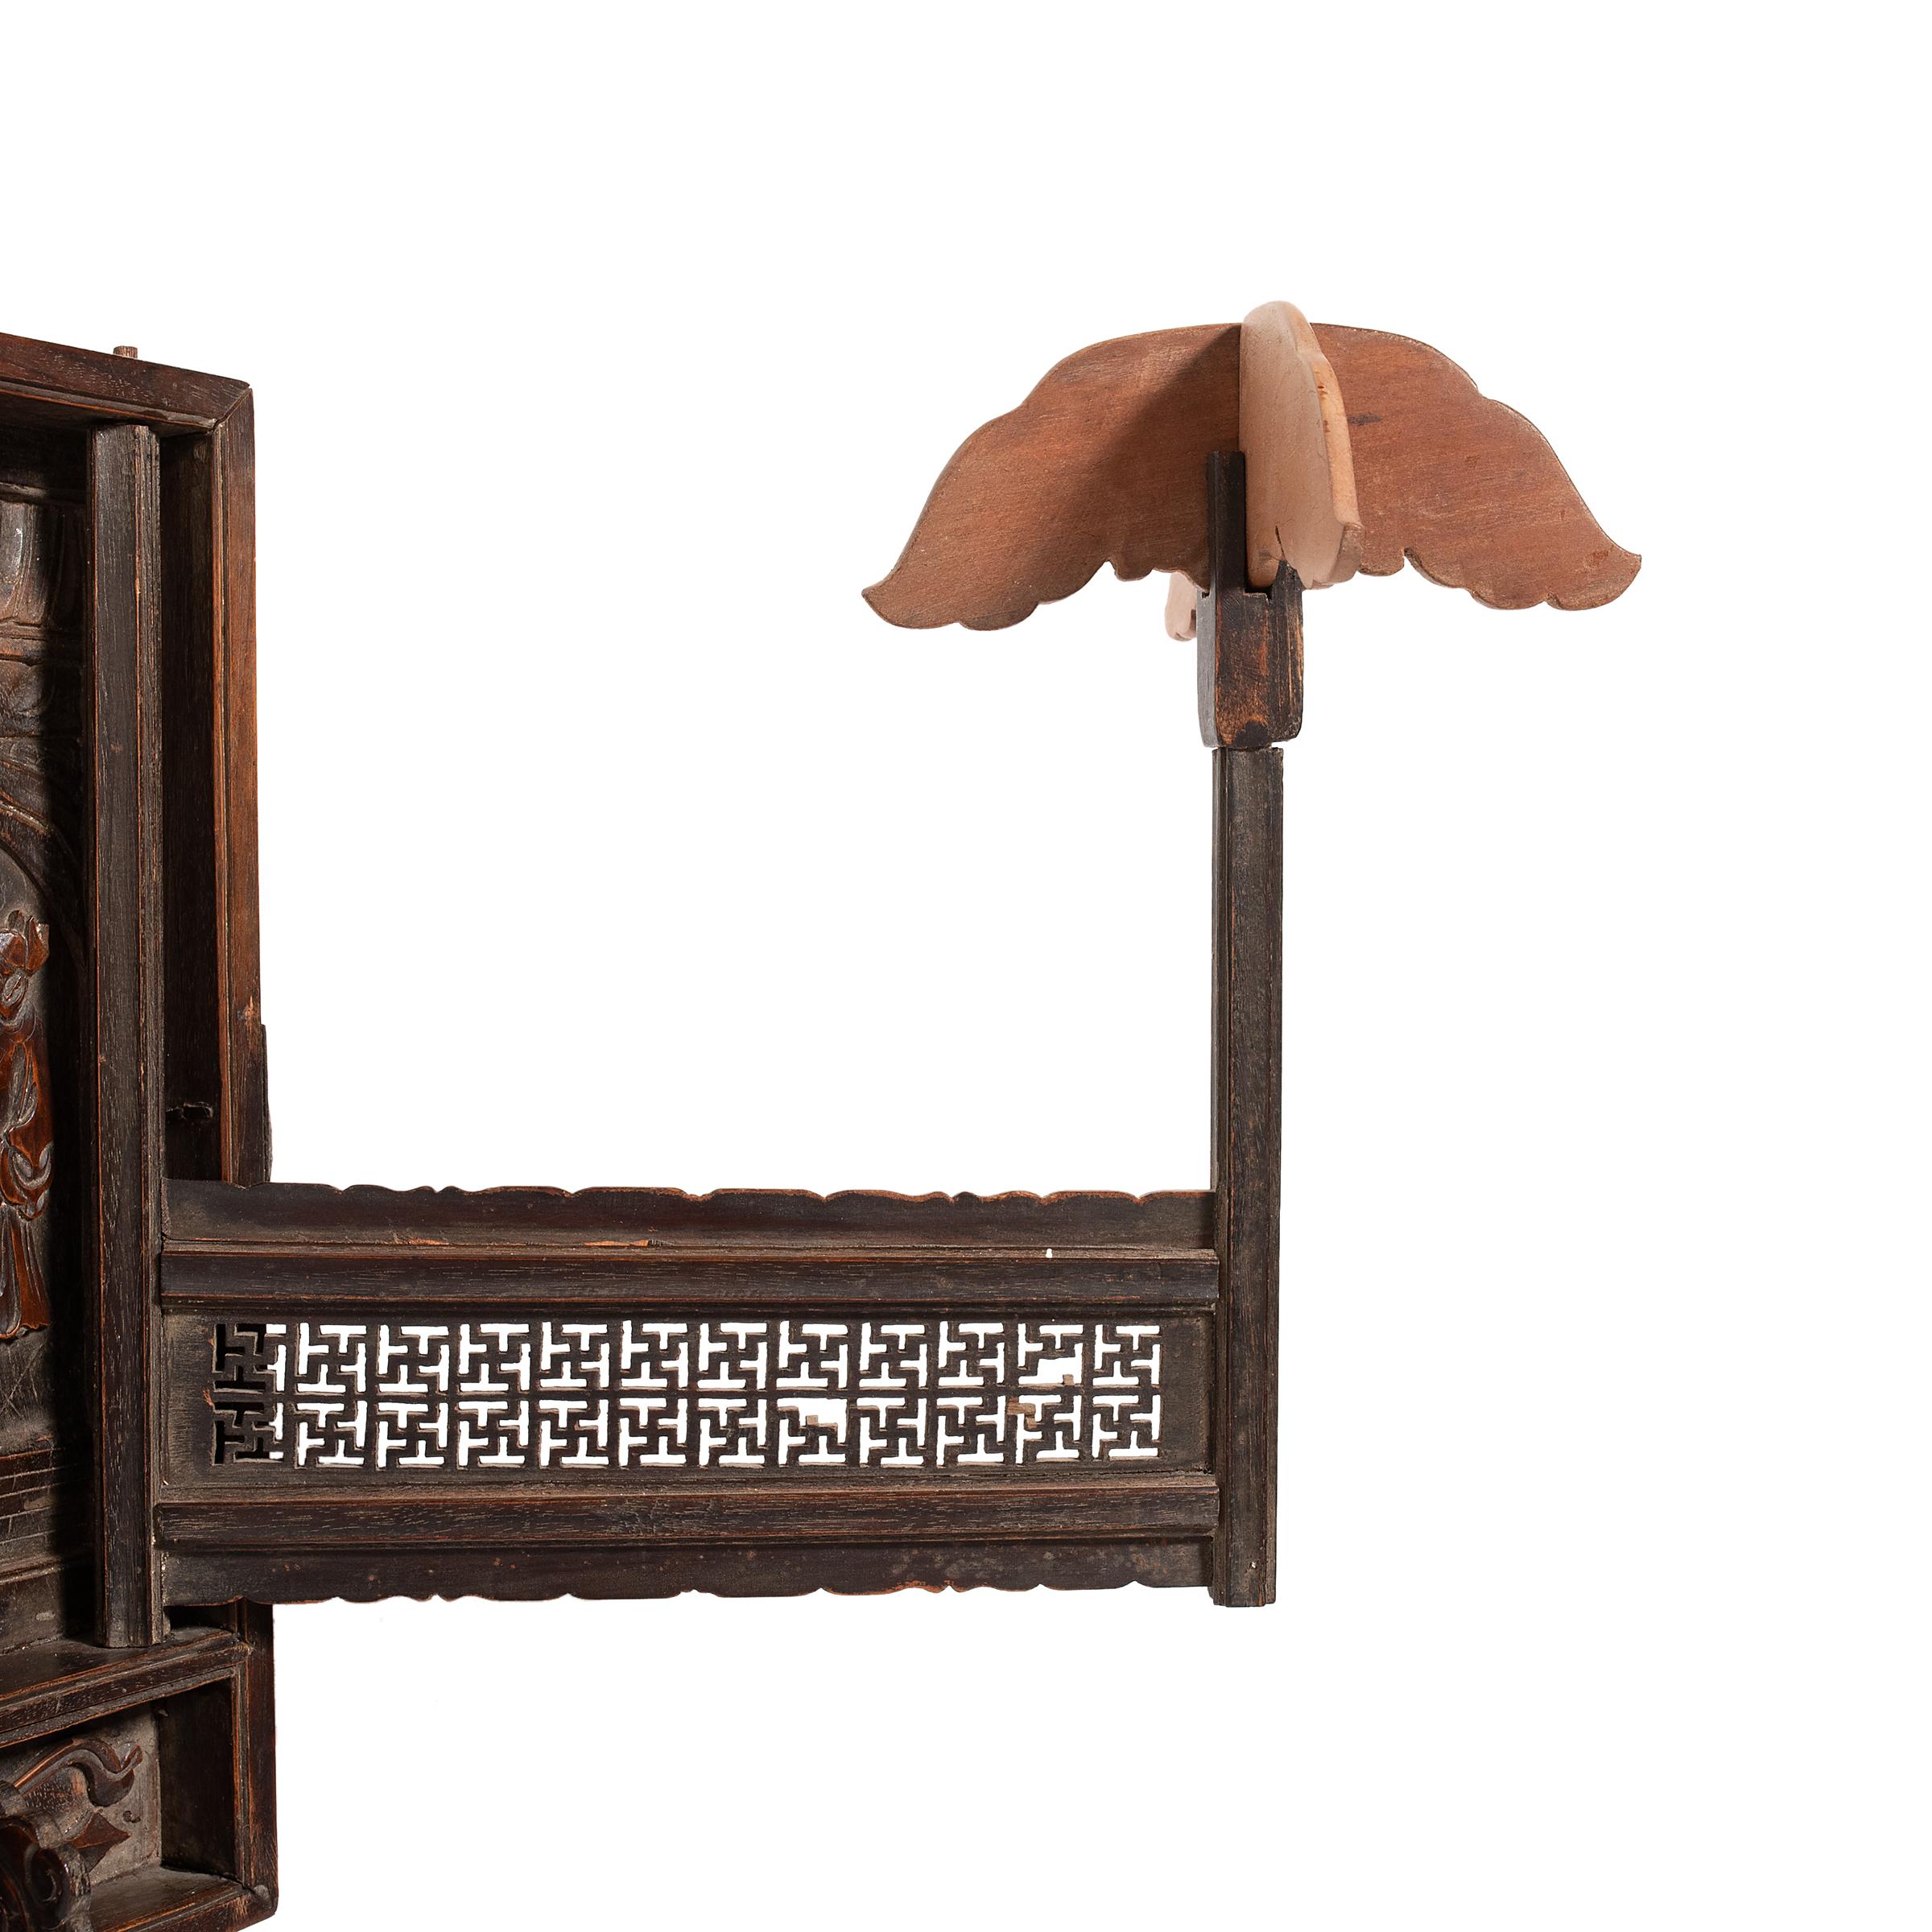 Folding Chinese Traveler's Hat Rack, c. 1850 In Good Condition For Sale In Chicago, IL